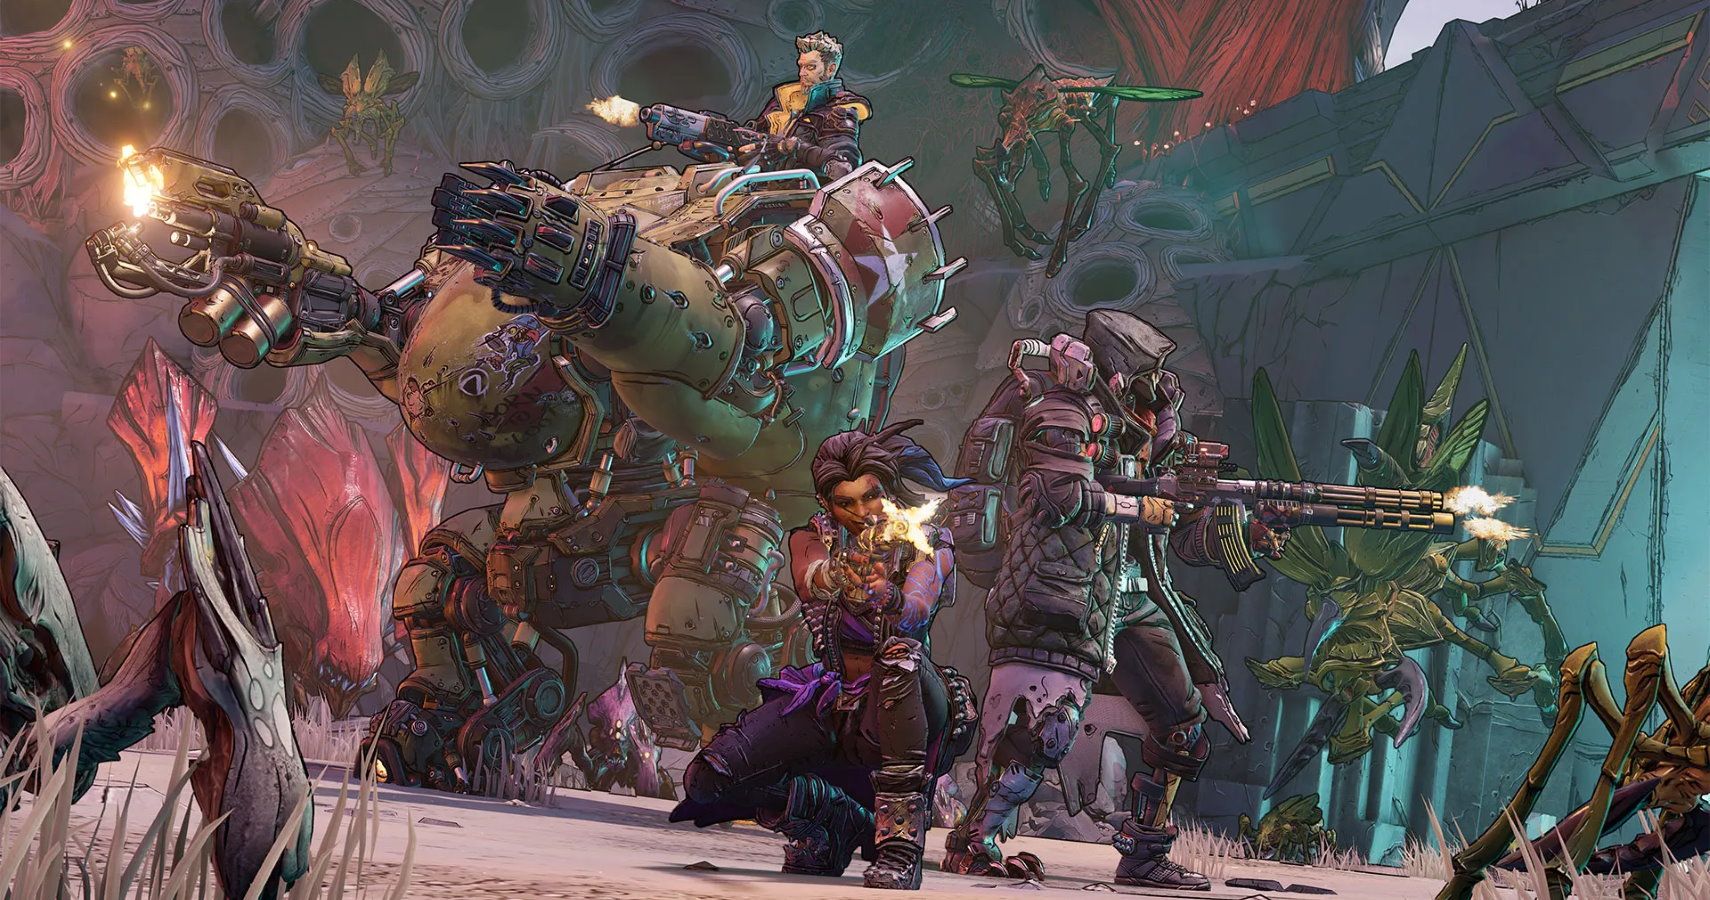 Borderlands 3 Every Easter Egg Gun Found So Far (And How To Get Them)